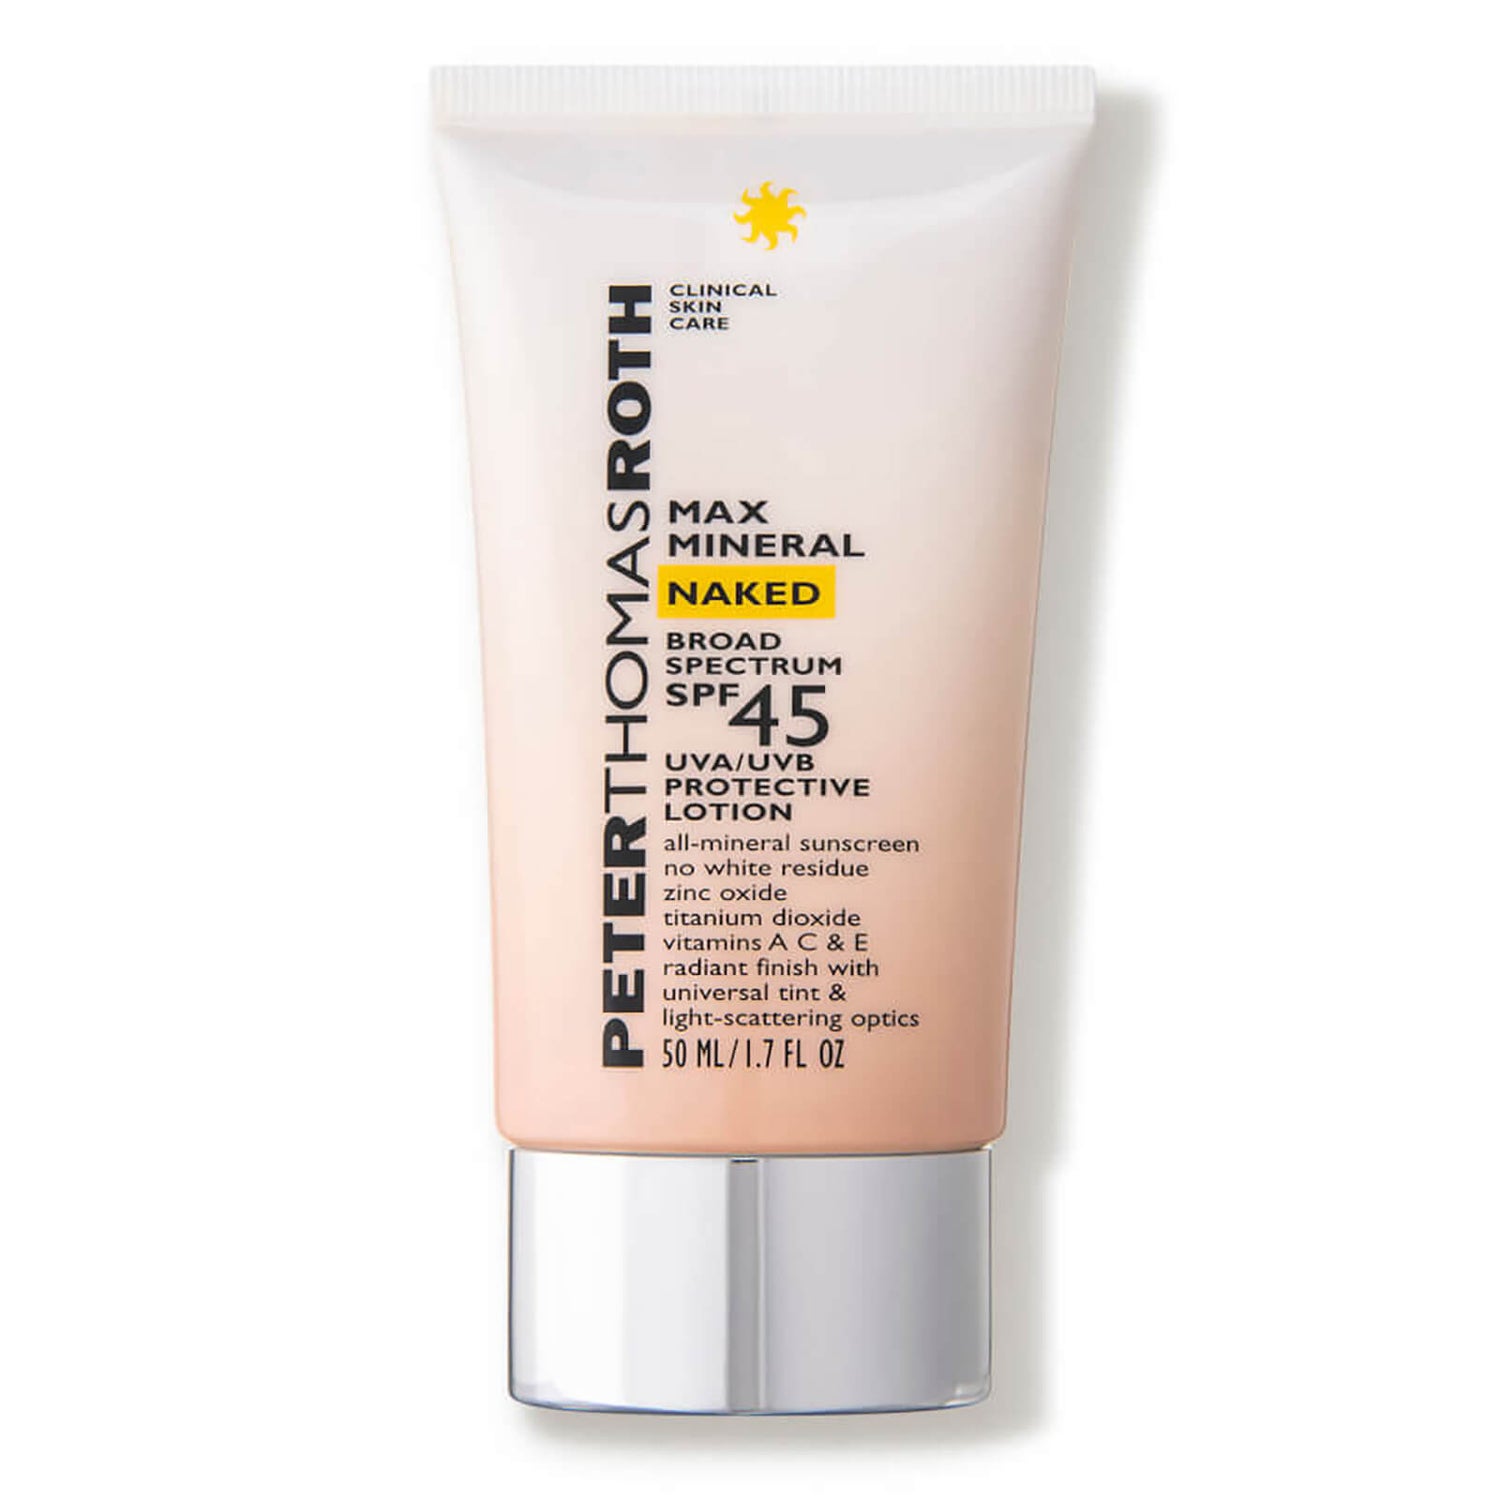 Peter Thomas Roth Max Mineral Naked Broad Spectrum SPF 45 (1.7 fl. oz.)